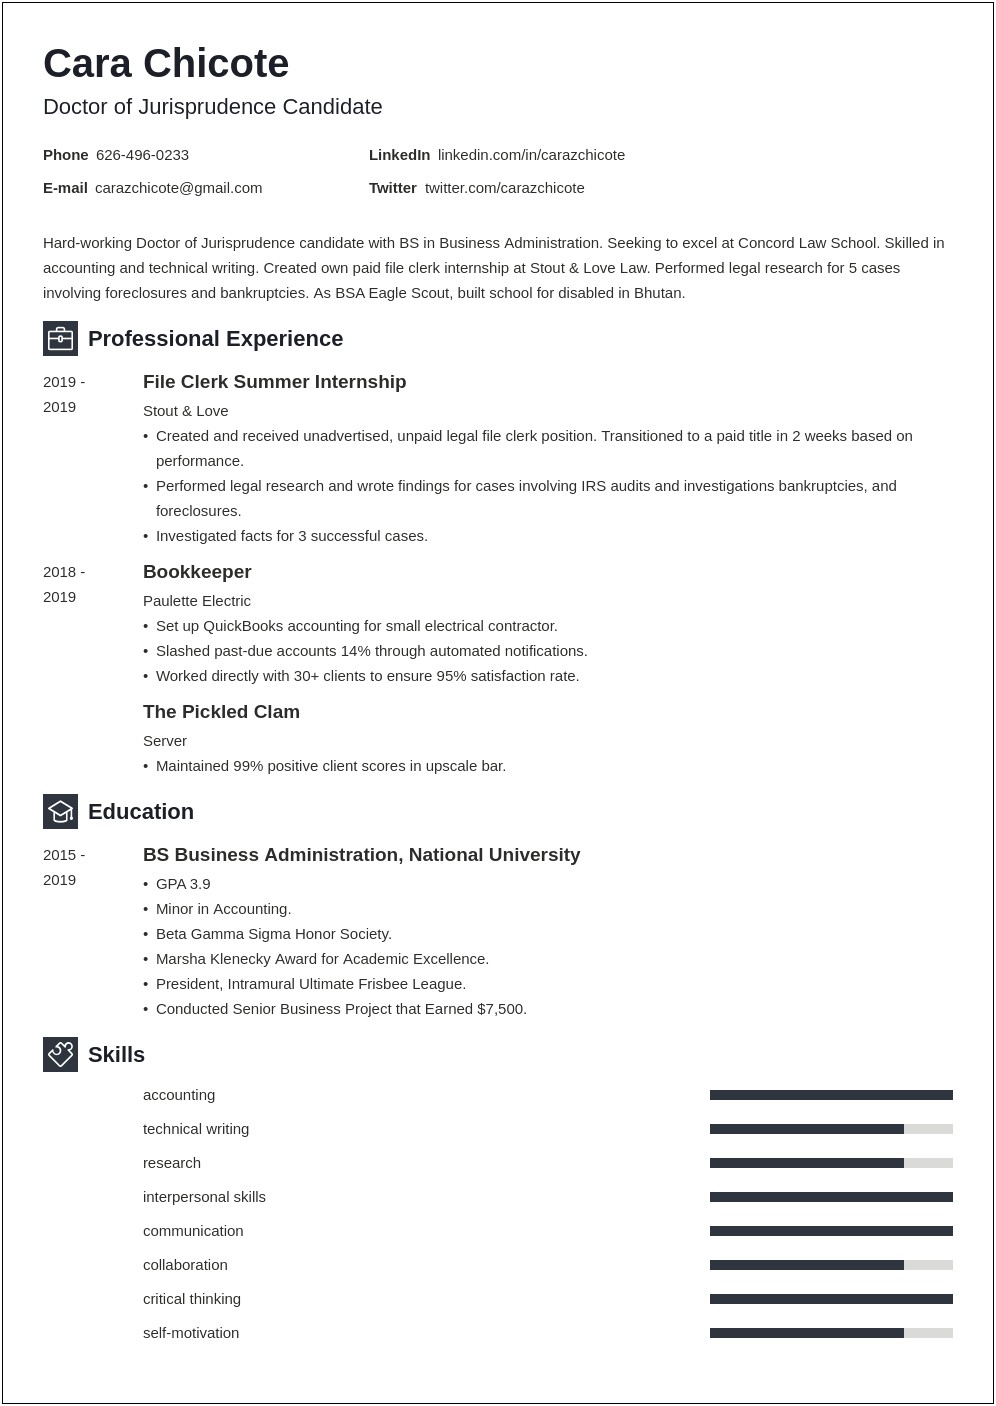 Resume Examples That Got Into Top Law Schools